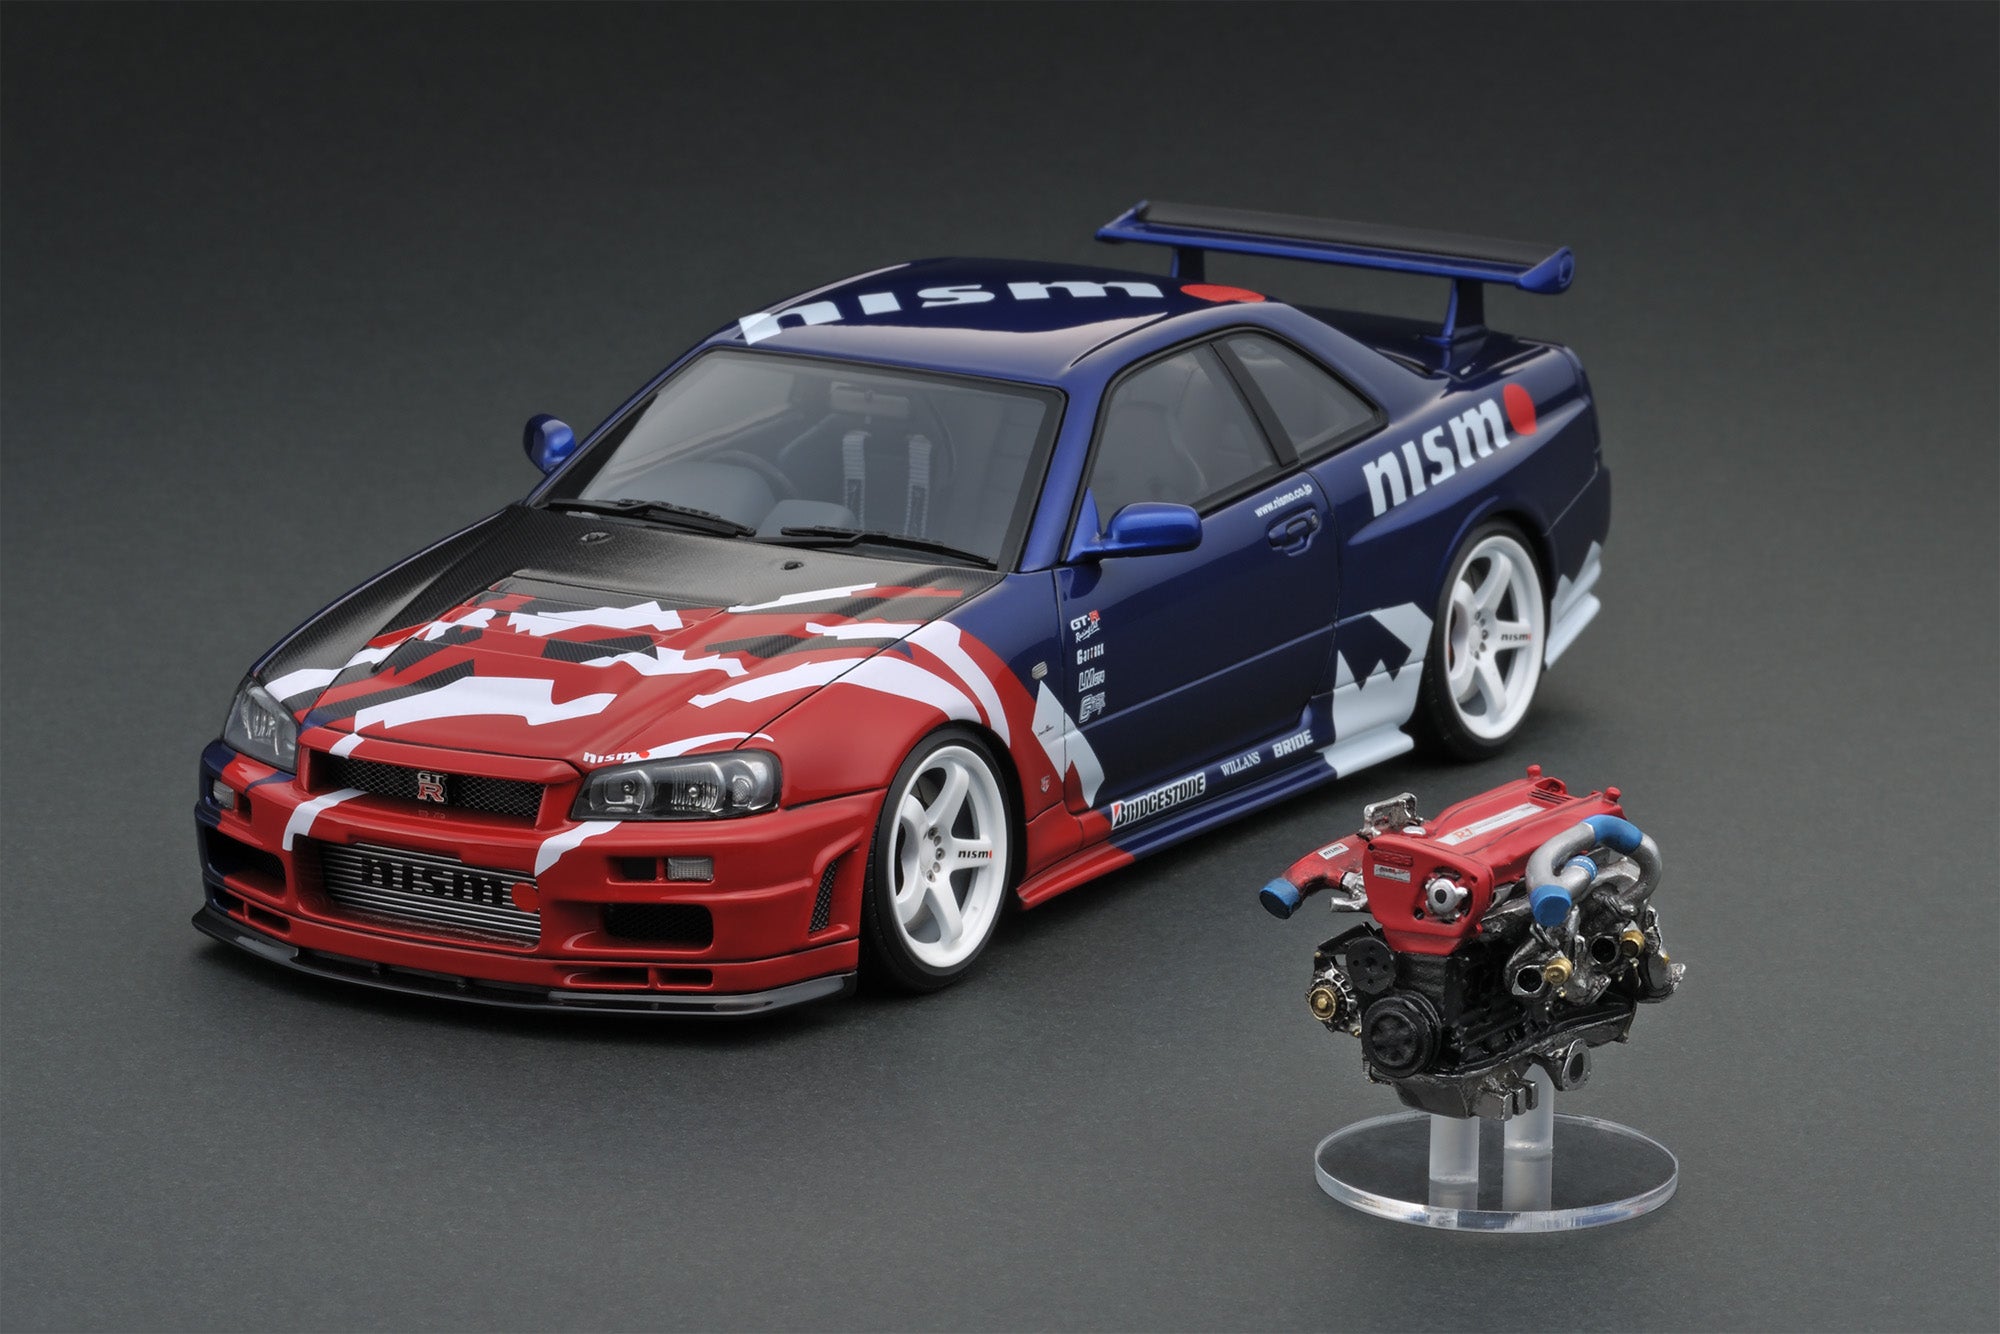 Ig Event Online Shop Limited Ig16 1 18 Nismo R34 Gt R R Tune Launch Ignition Model